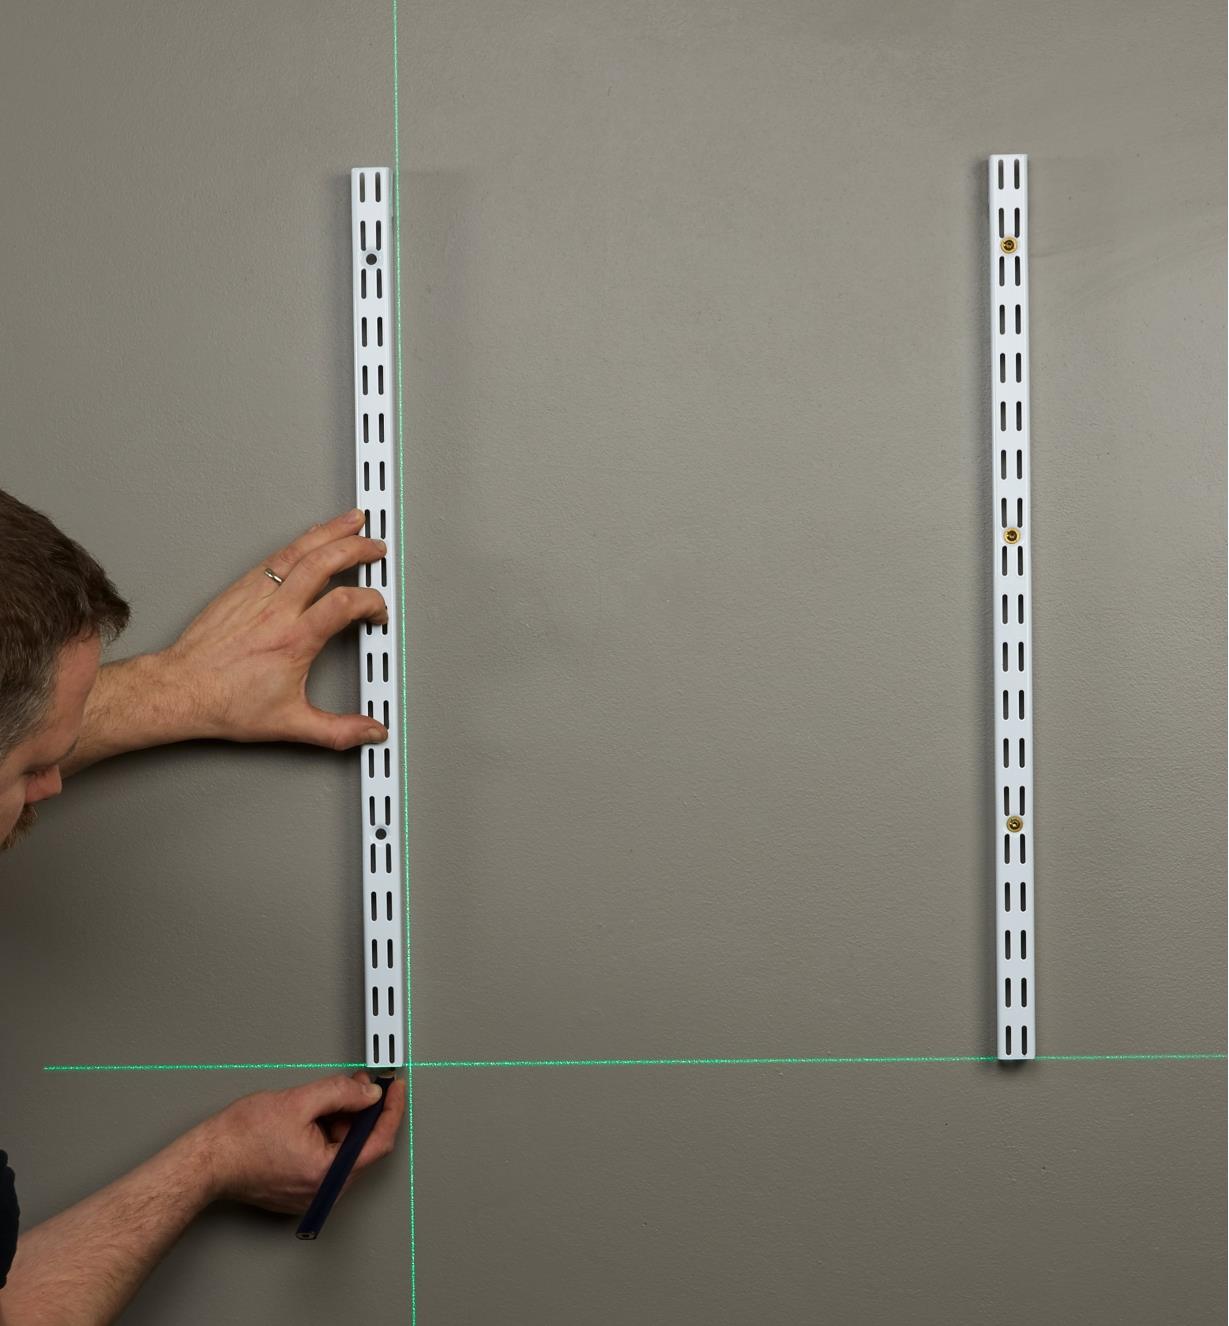 A green crosshair laser level beam is projected onto a wall, allowing an installer to ensure shelf tracking is level and plumb